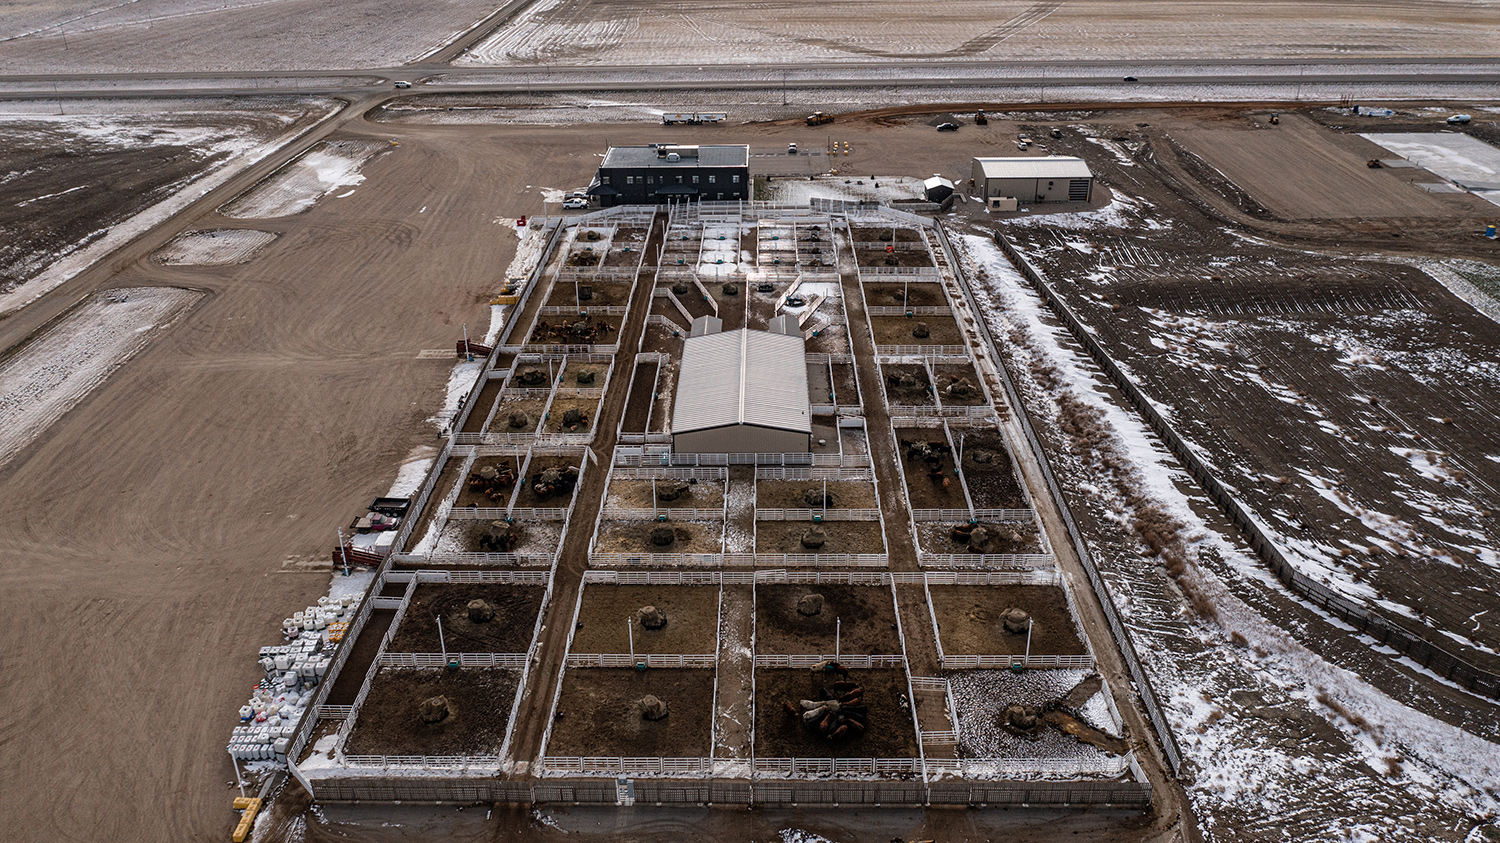 Drone Services for Commercial Real Estate in Saskatchewan